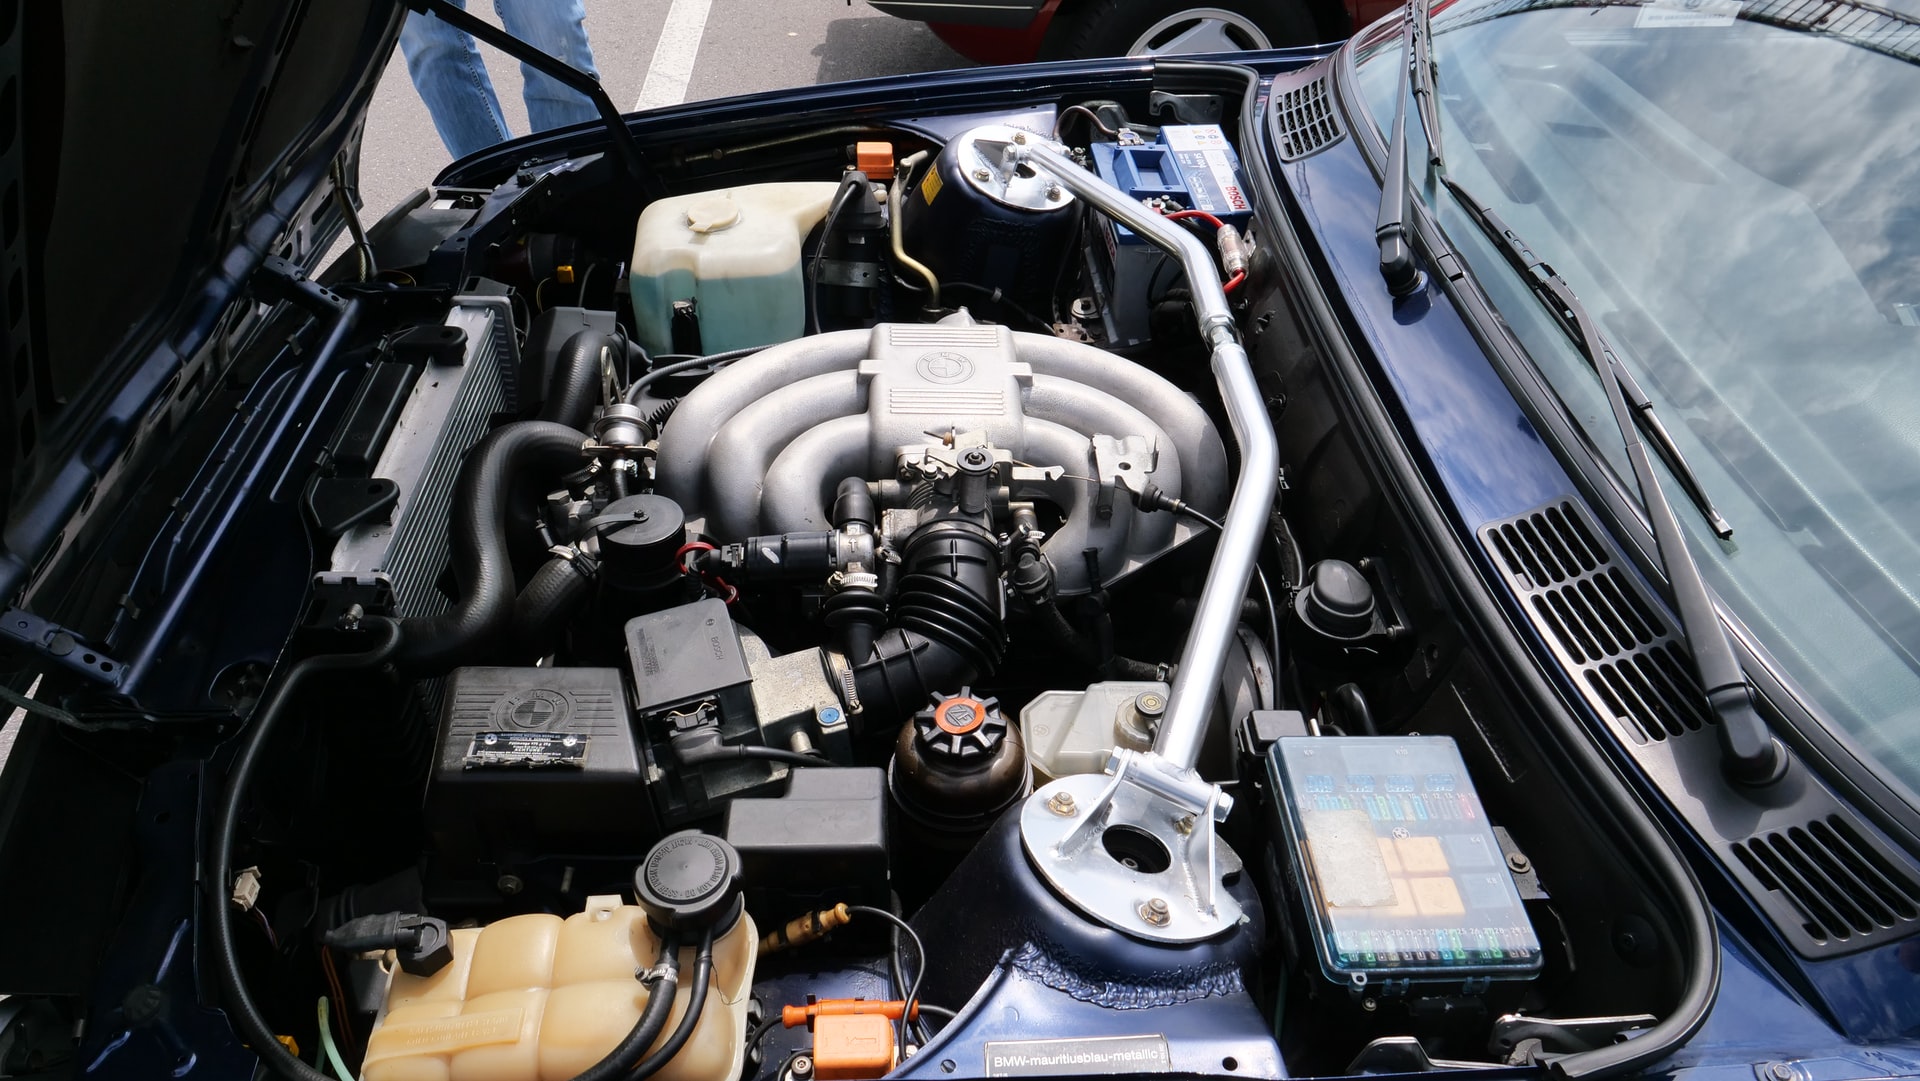 Proper Car Engine Care: Oil Change and Engine Cleanup